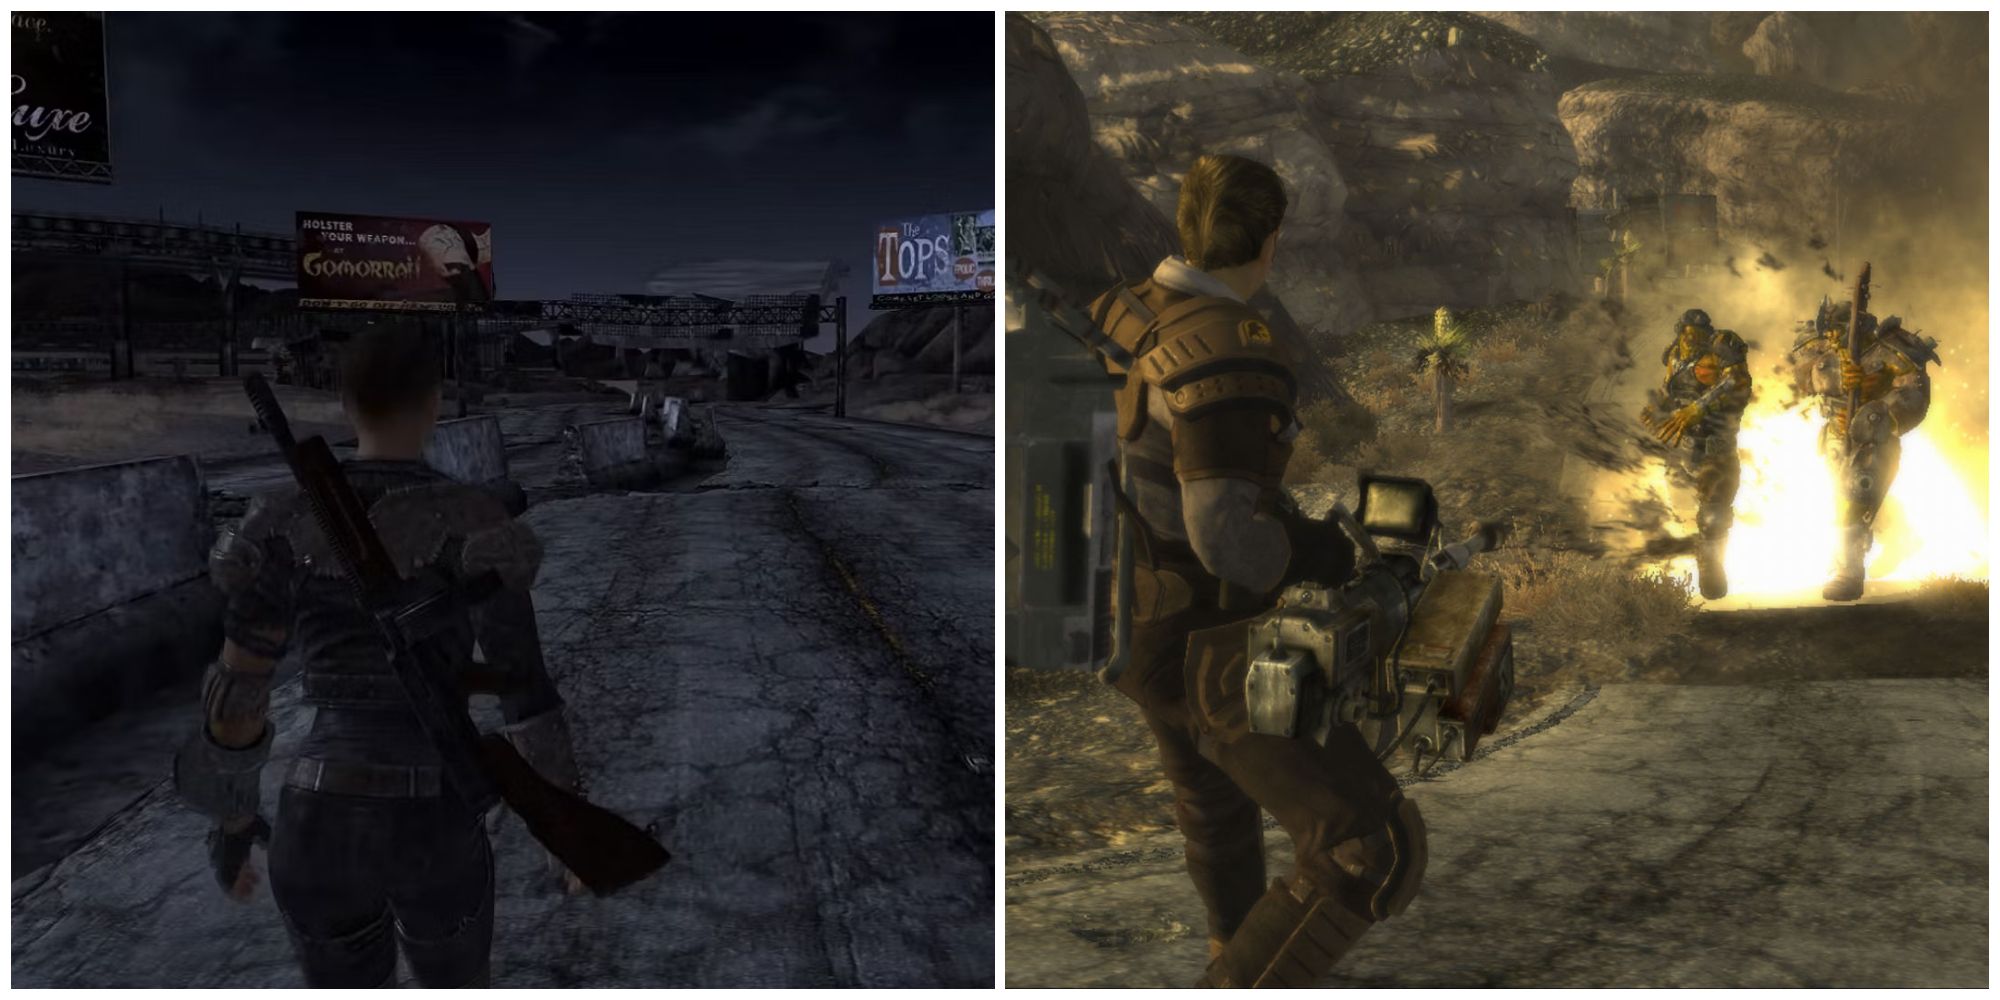 Split image of an installed mod and a character shooting a weapon in Fallout New Vegas